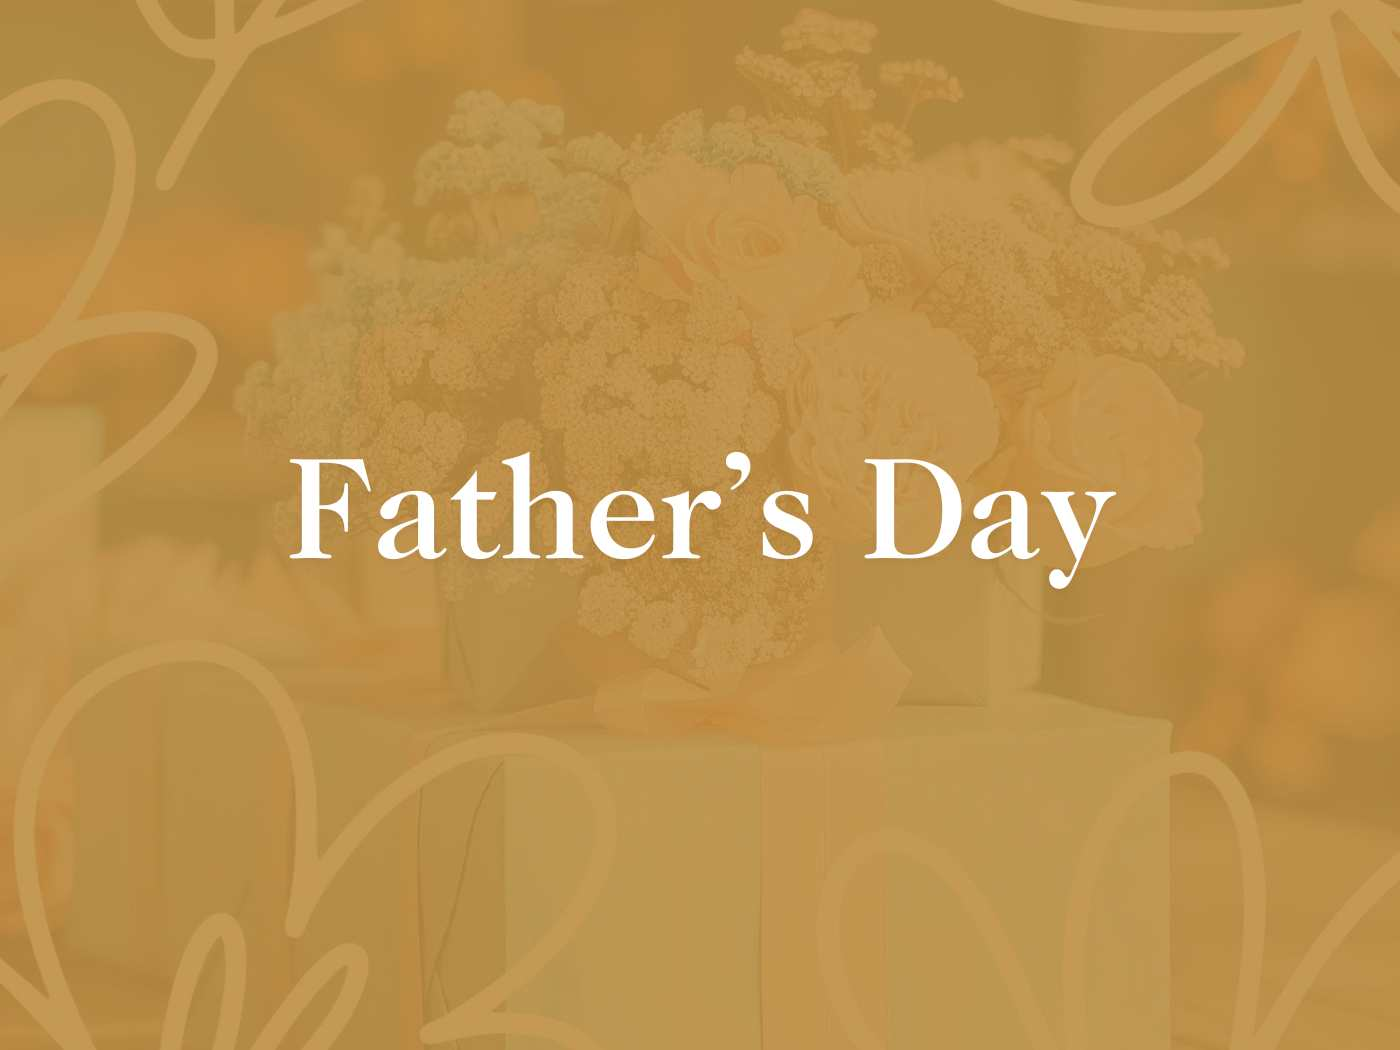 Elegant Father's Day floral arrangement from the Father's Day Collection at Fabulous Flowers and Gifts, delivered with heart across South Africa with nationwide delivery.